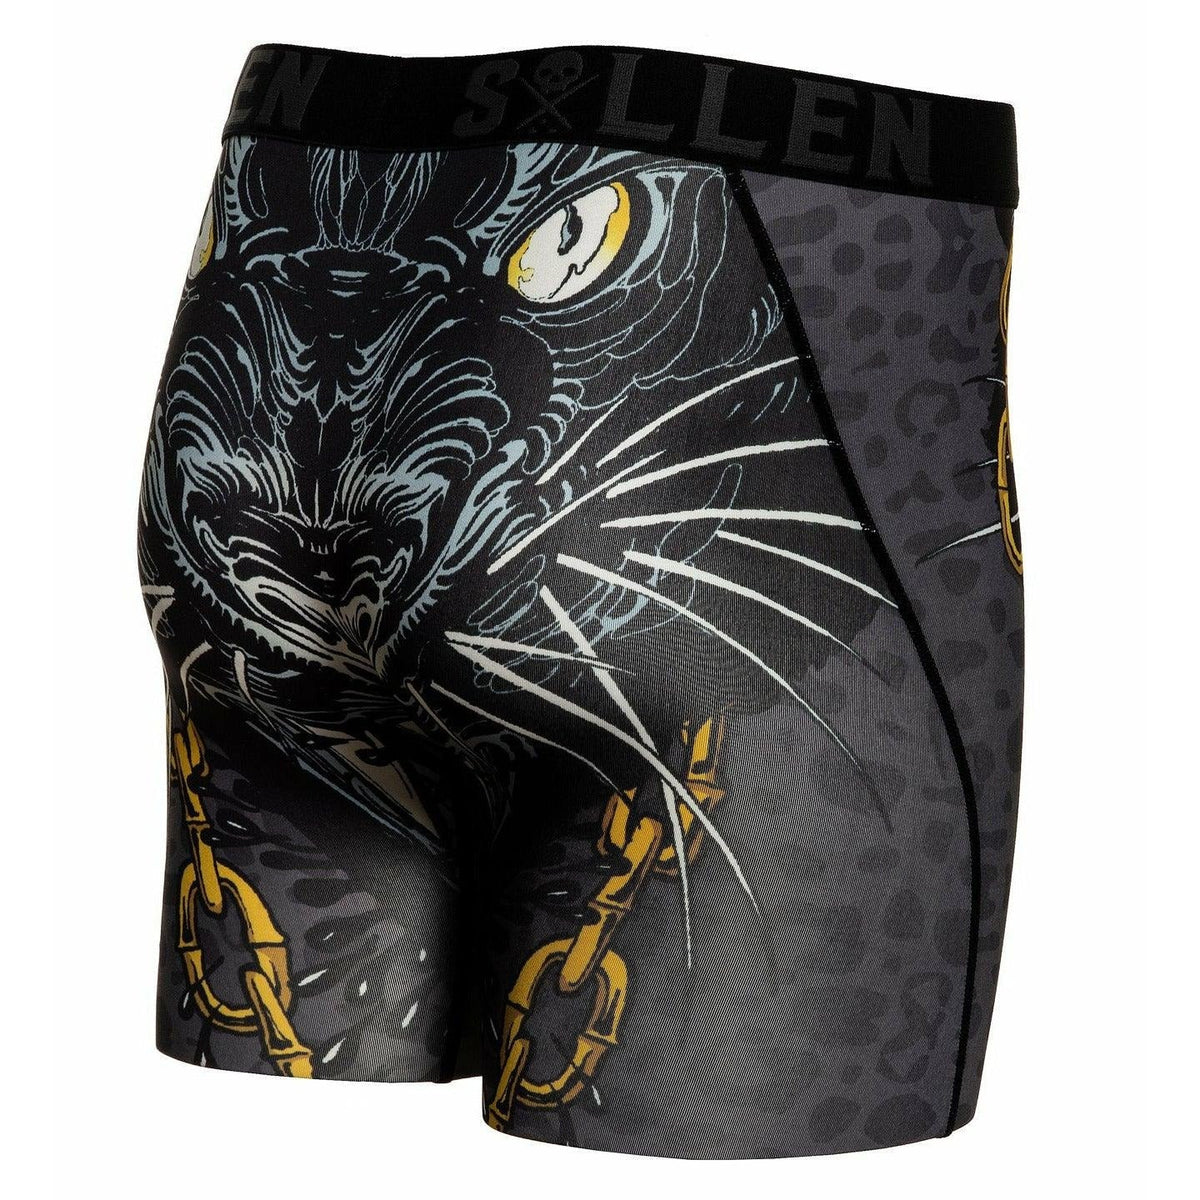 SULLEN-ART-COLLECTIVE-CLOTHING-UNCHAINED-BOXERS - UNDERWEAR - Synik Clothing - synikclothing.com